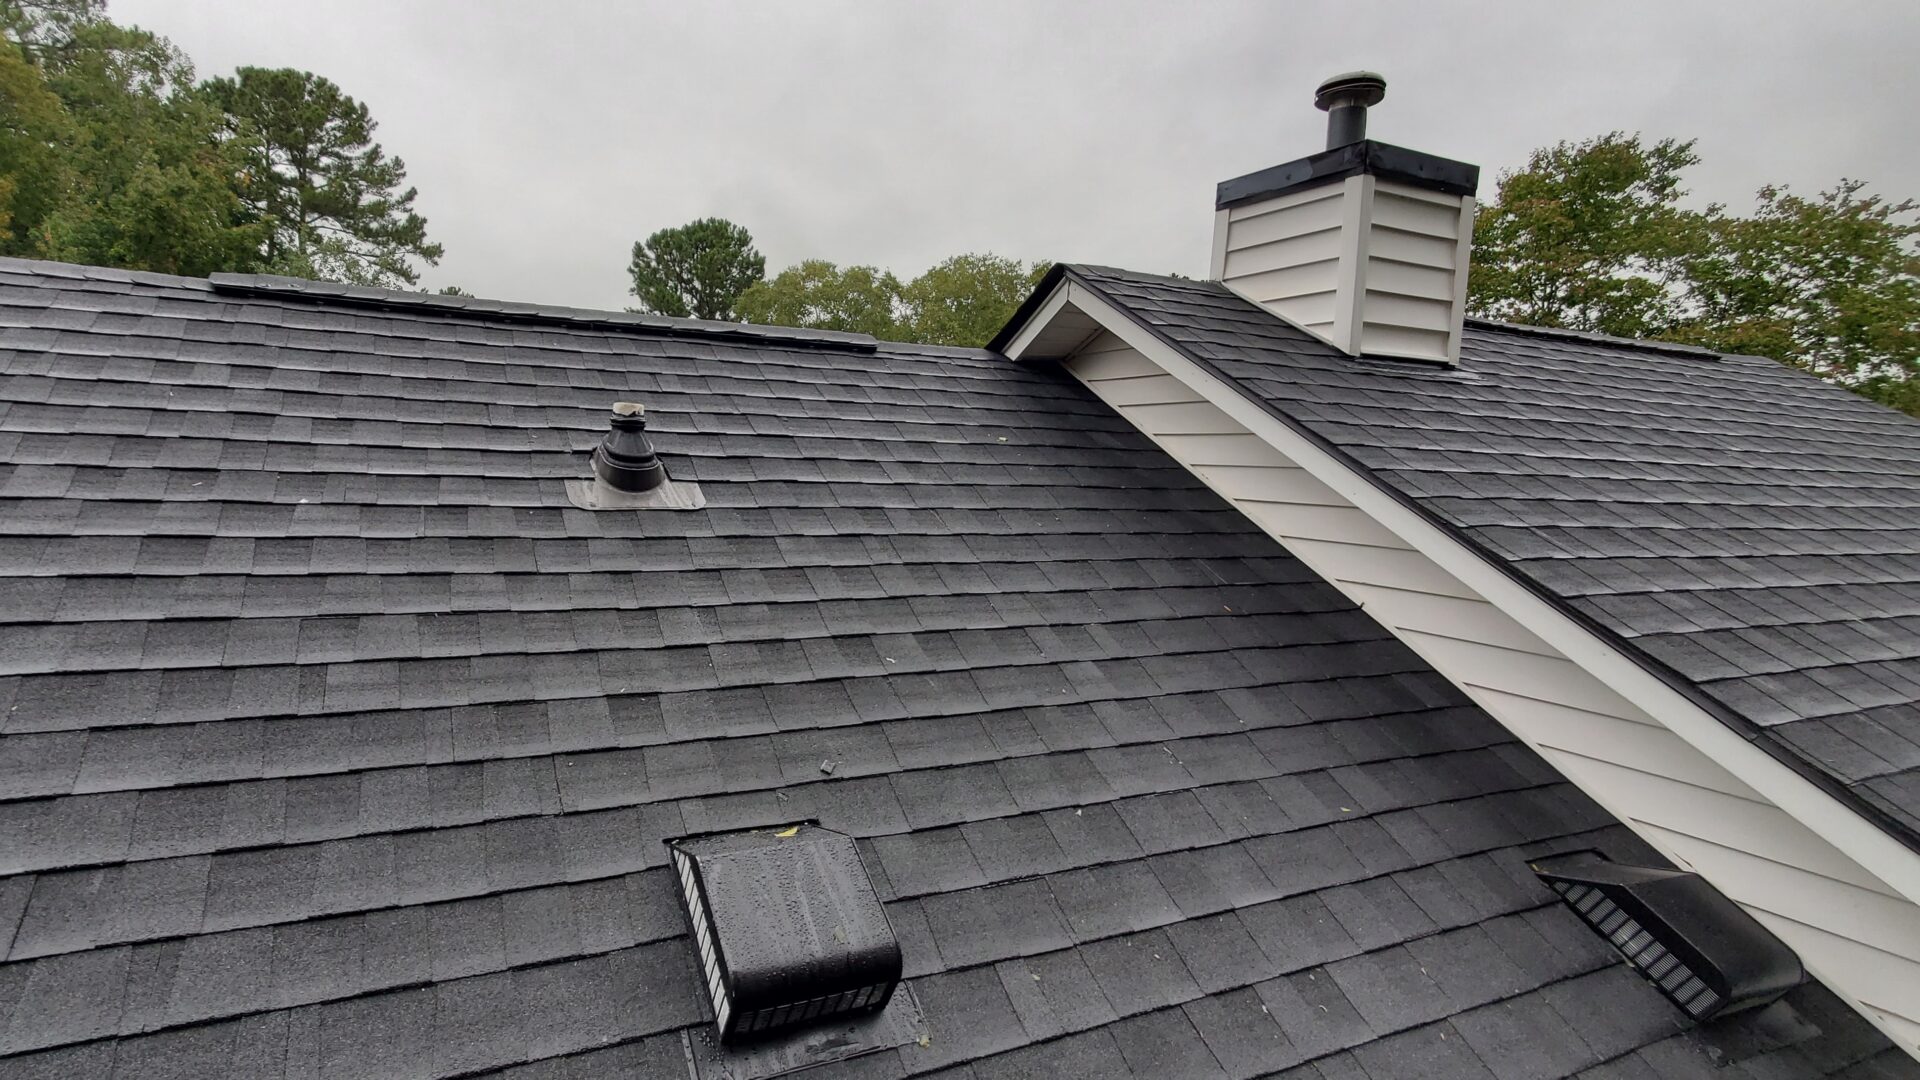 durable roof replacement friendswood brinkmann quality roofing services scaled How Often Does A Roof Need To Be Replaced?